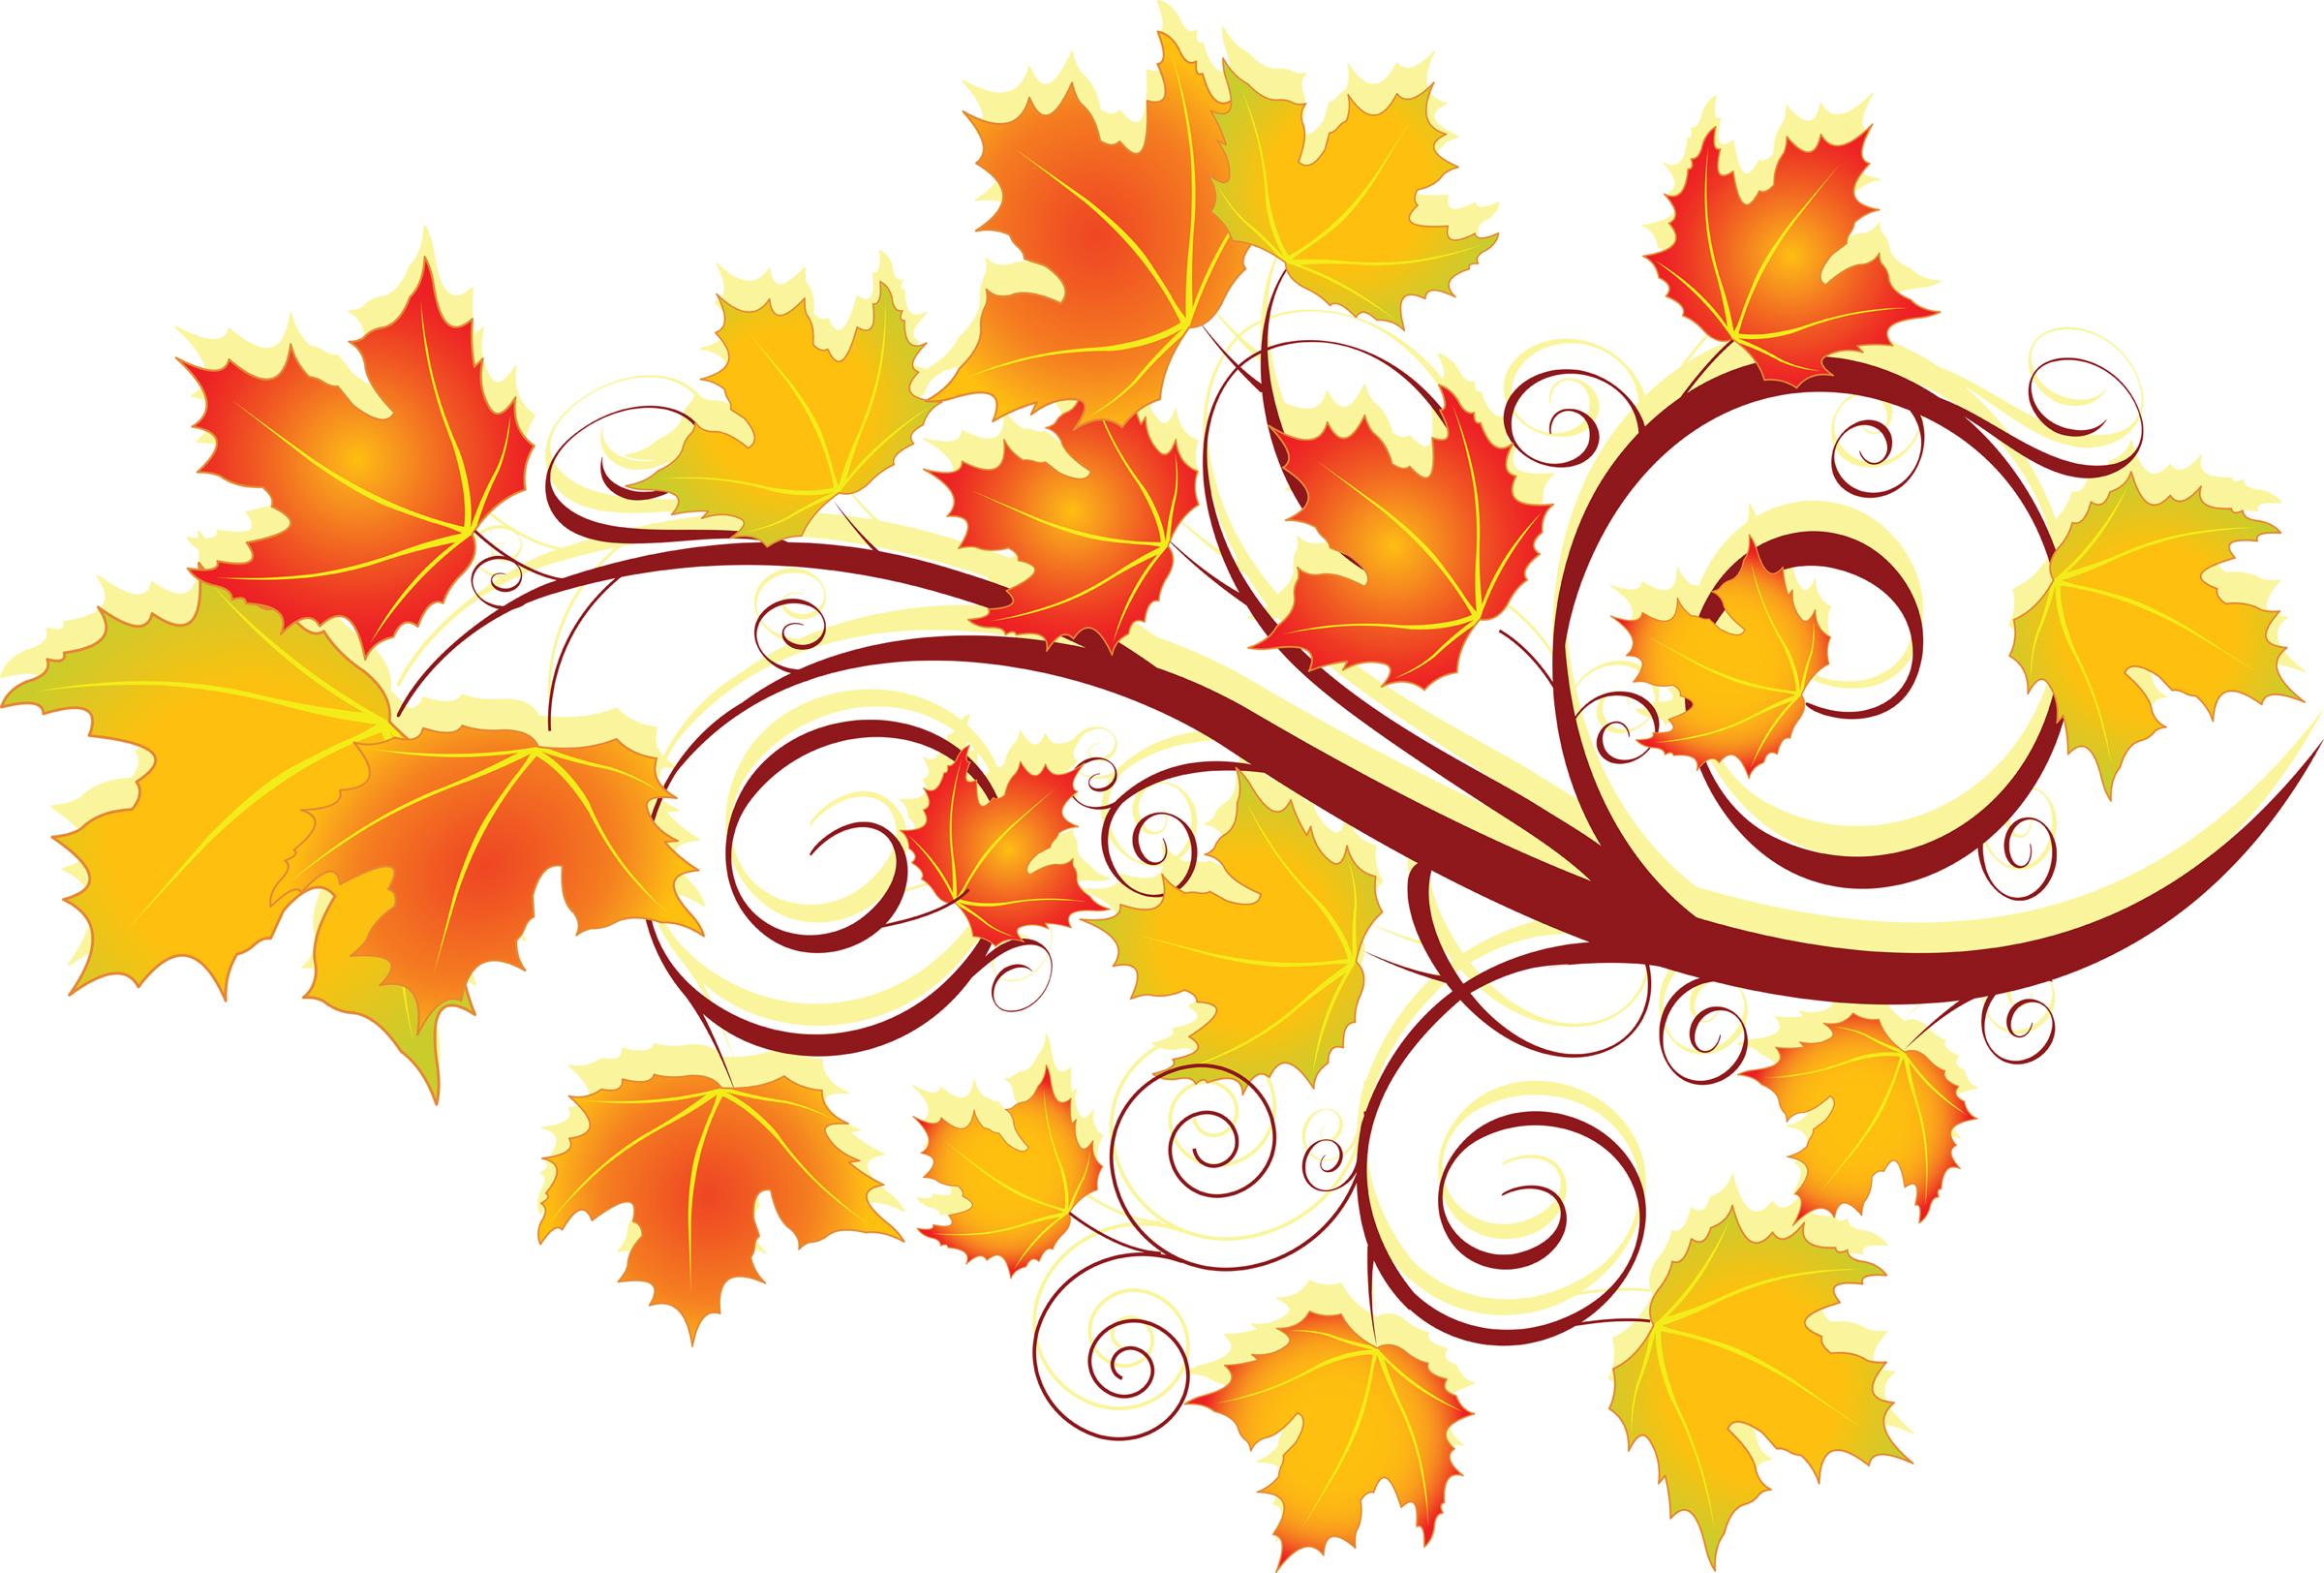 Download Image - Leaves Fall , HD Wallpaper & Backgrounds